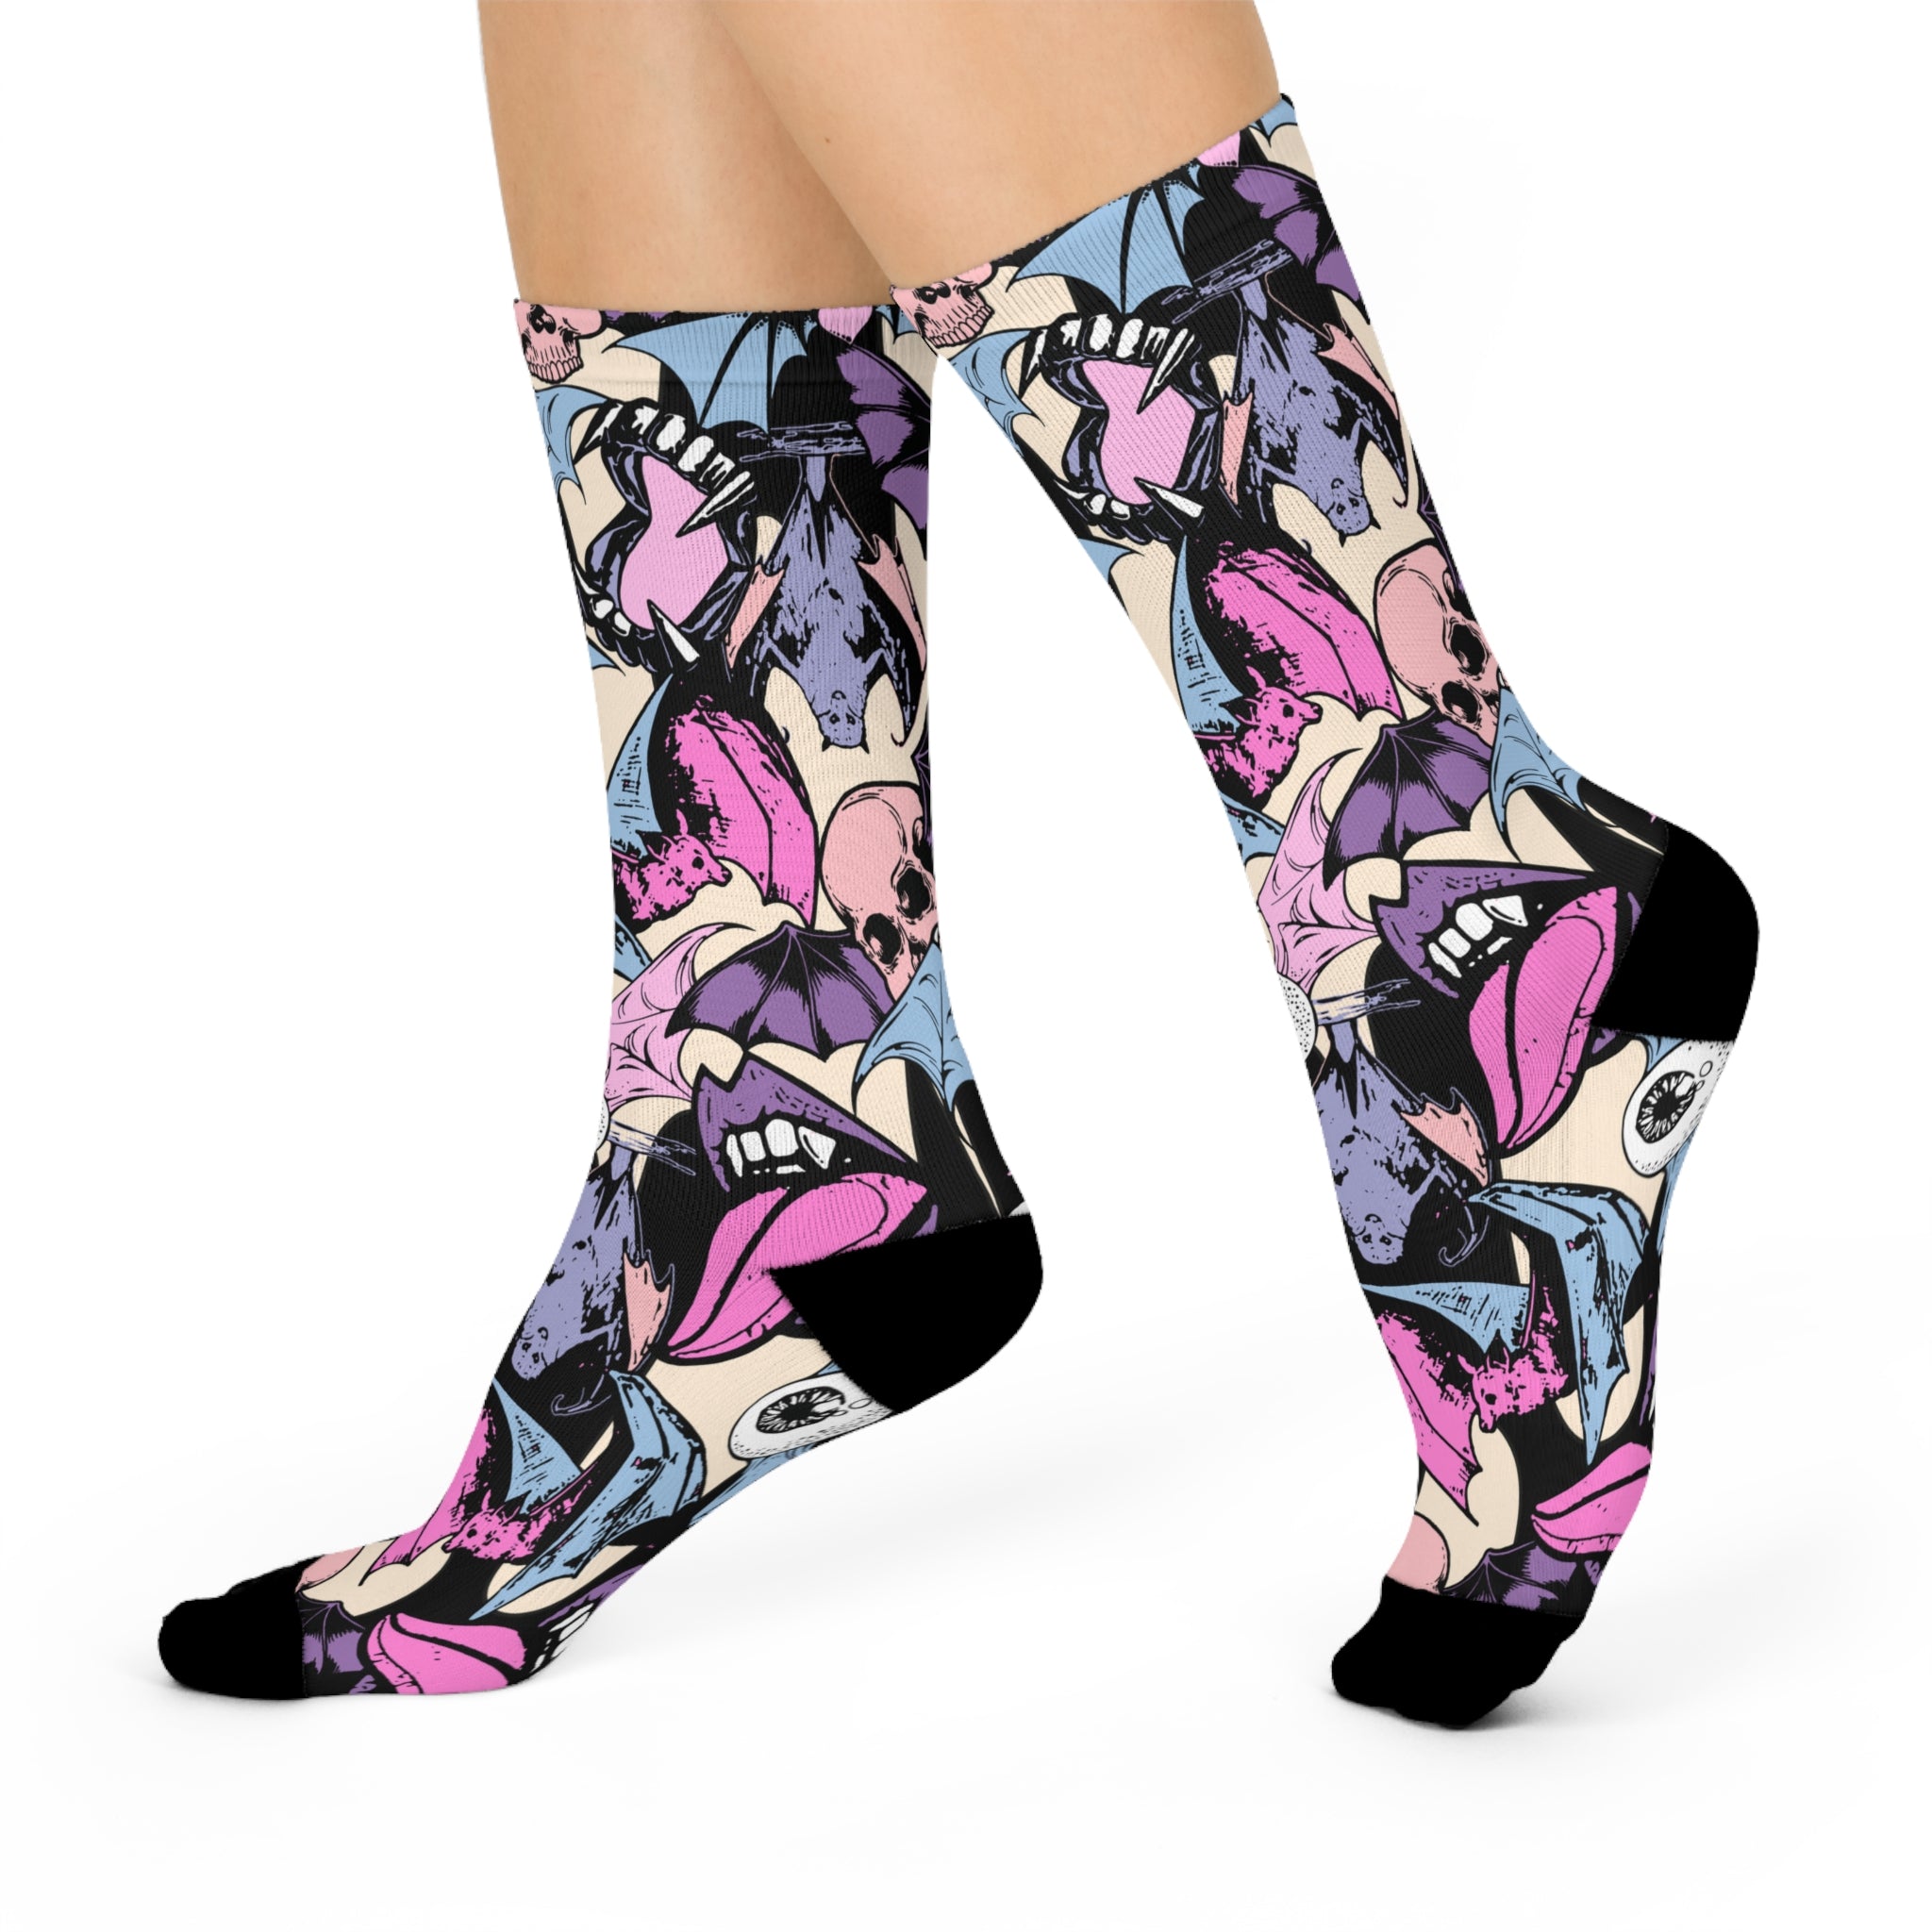 Freaky-fabulous socks sprawled on pink. Bats, skulls, and eyeballs galore. Punk rock meets Dracula's yard sale. Slip these on and let your feet do the screaming.